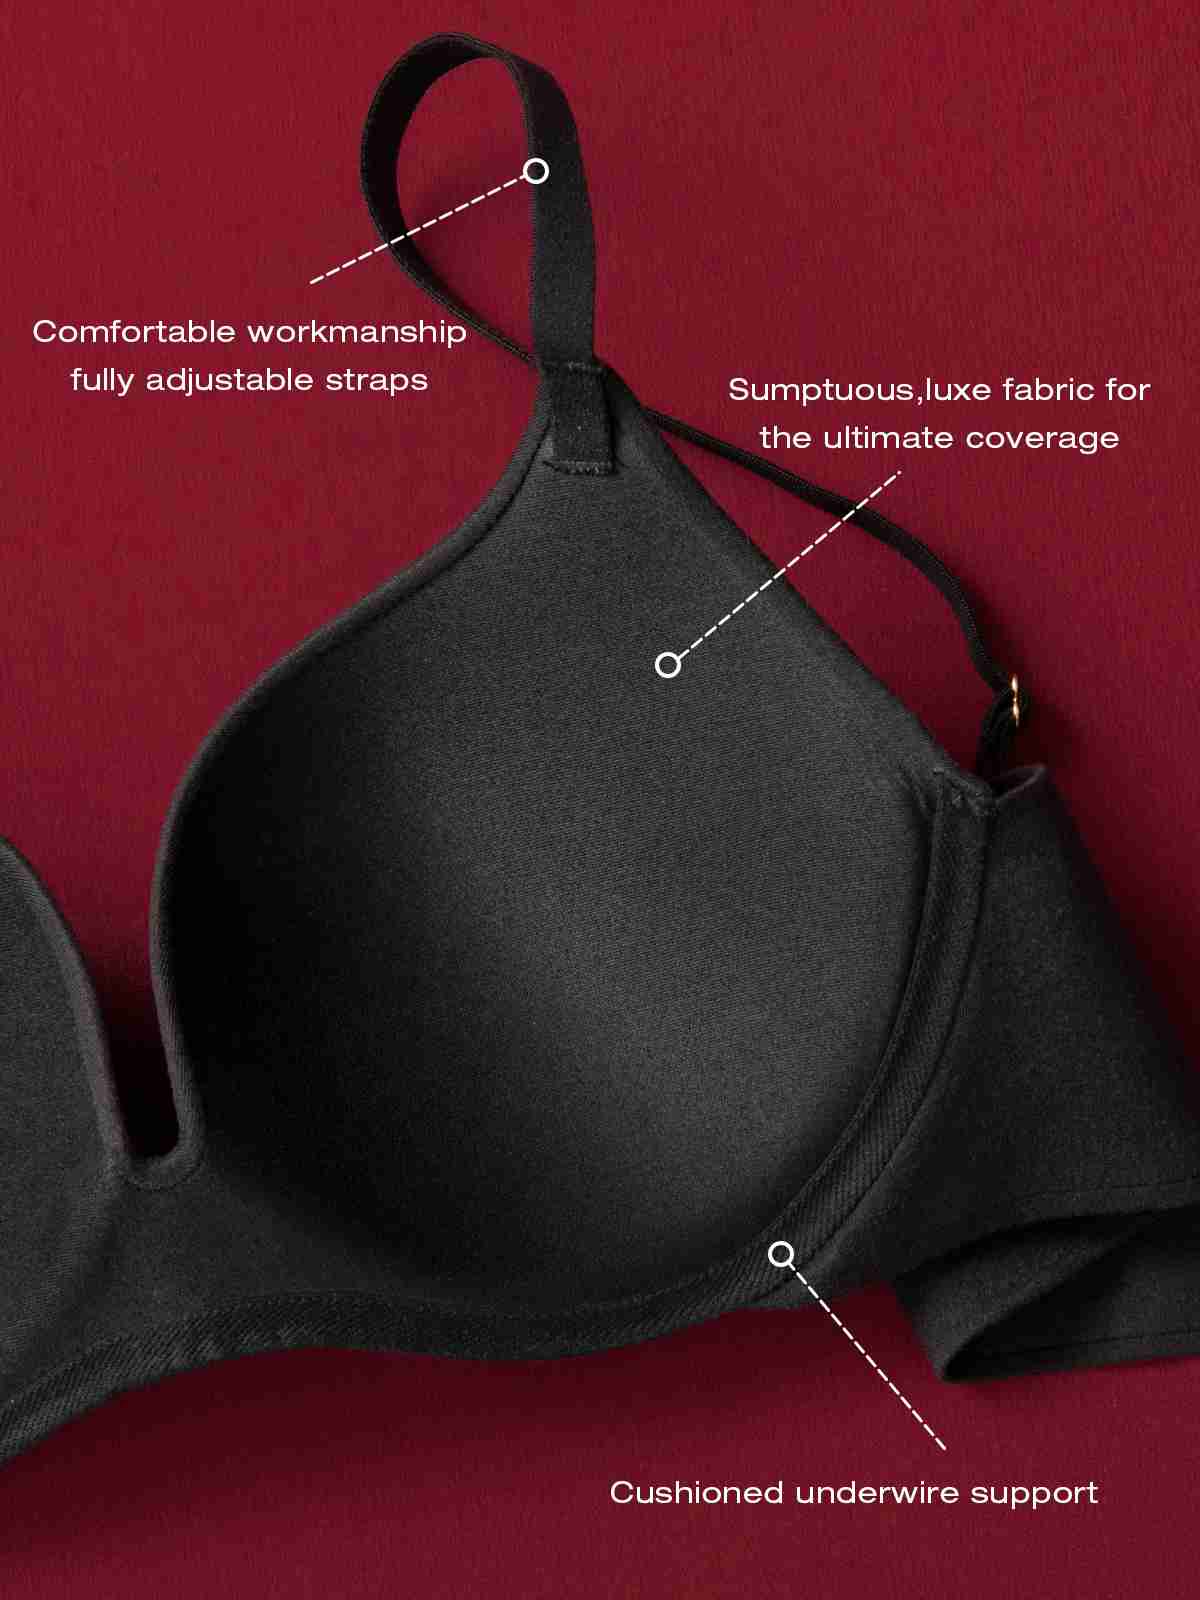 Wholesale add 2 cup sizes push up bra For Supportive Underwear 